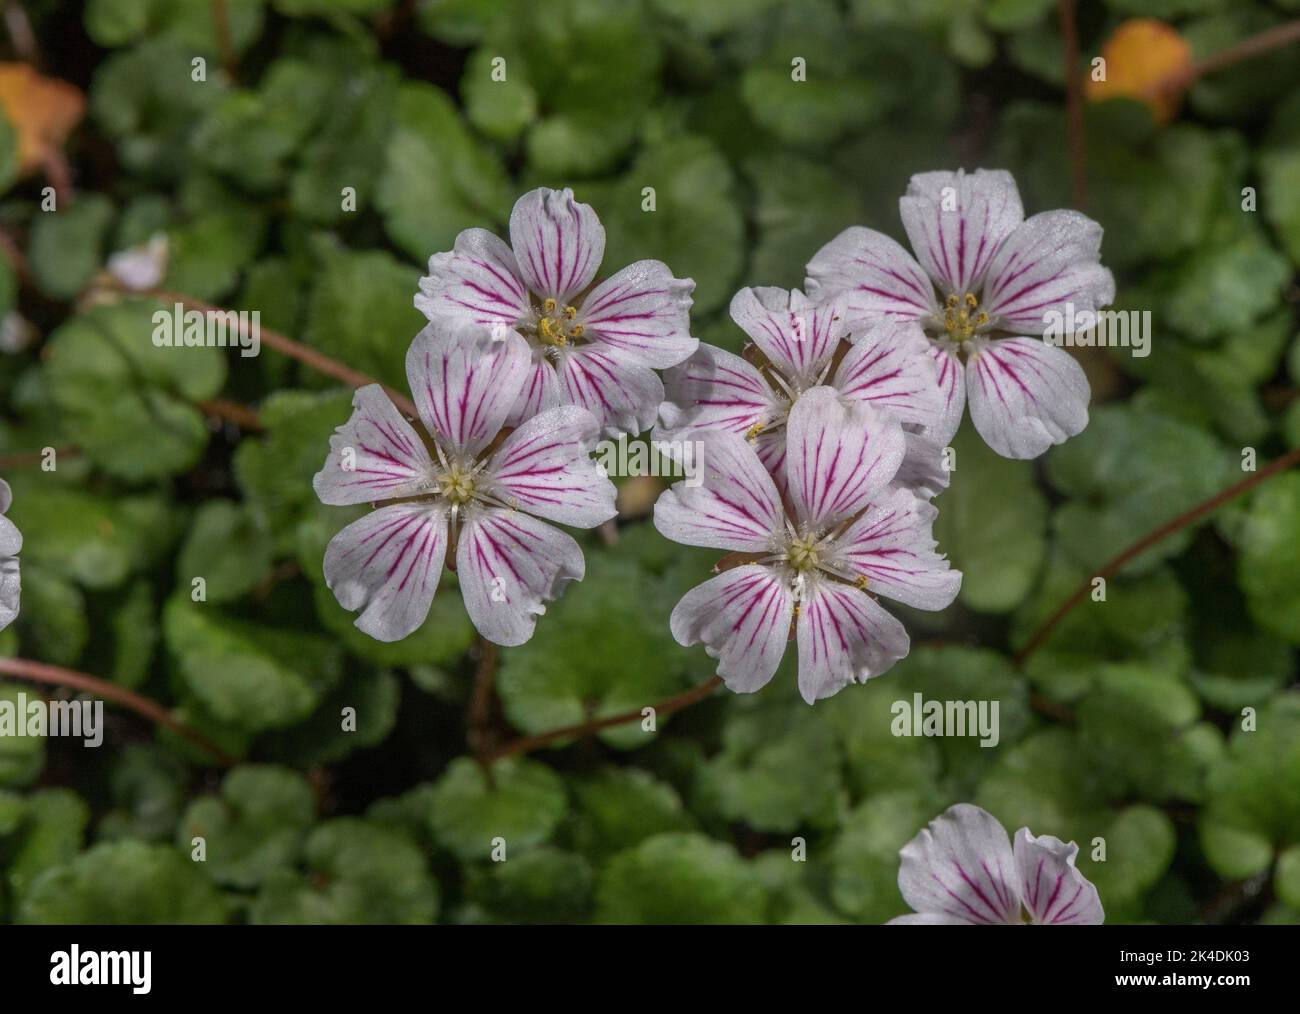 A Storksbill, Erodium reichardii, endemic to the Balearic Islands, Spain. . Stock Photo